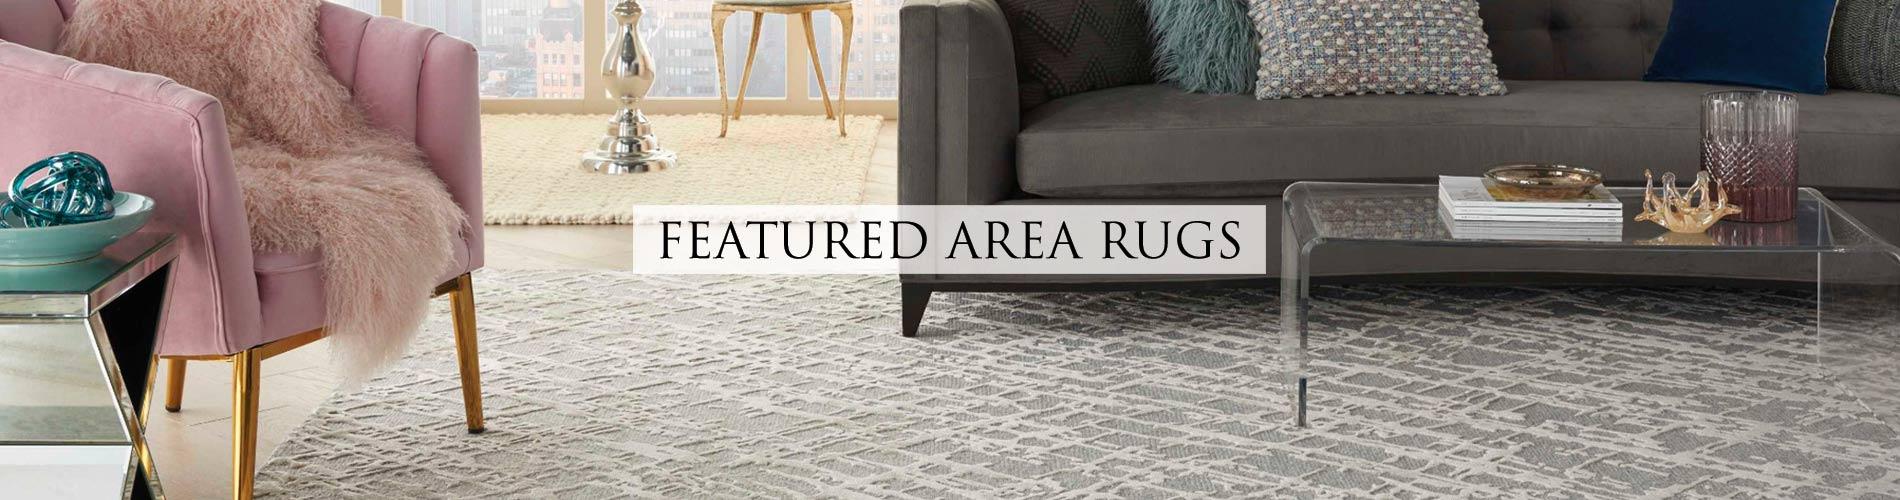 Featuring Name Brand Area Rugs - Naples, Fl - Abbey Carpet & Floor